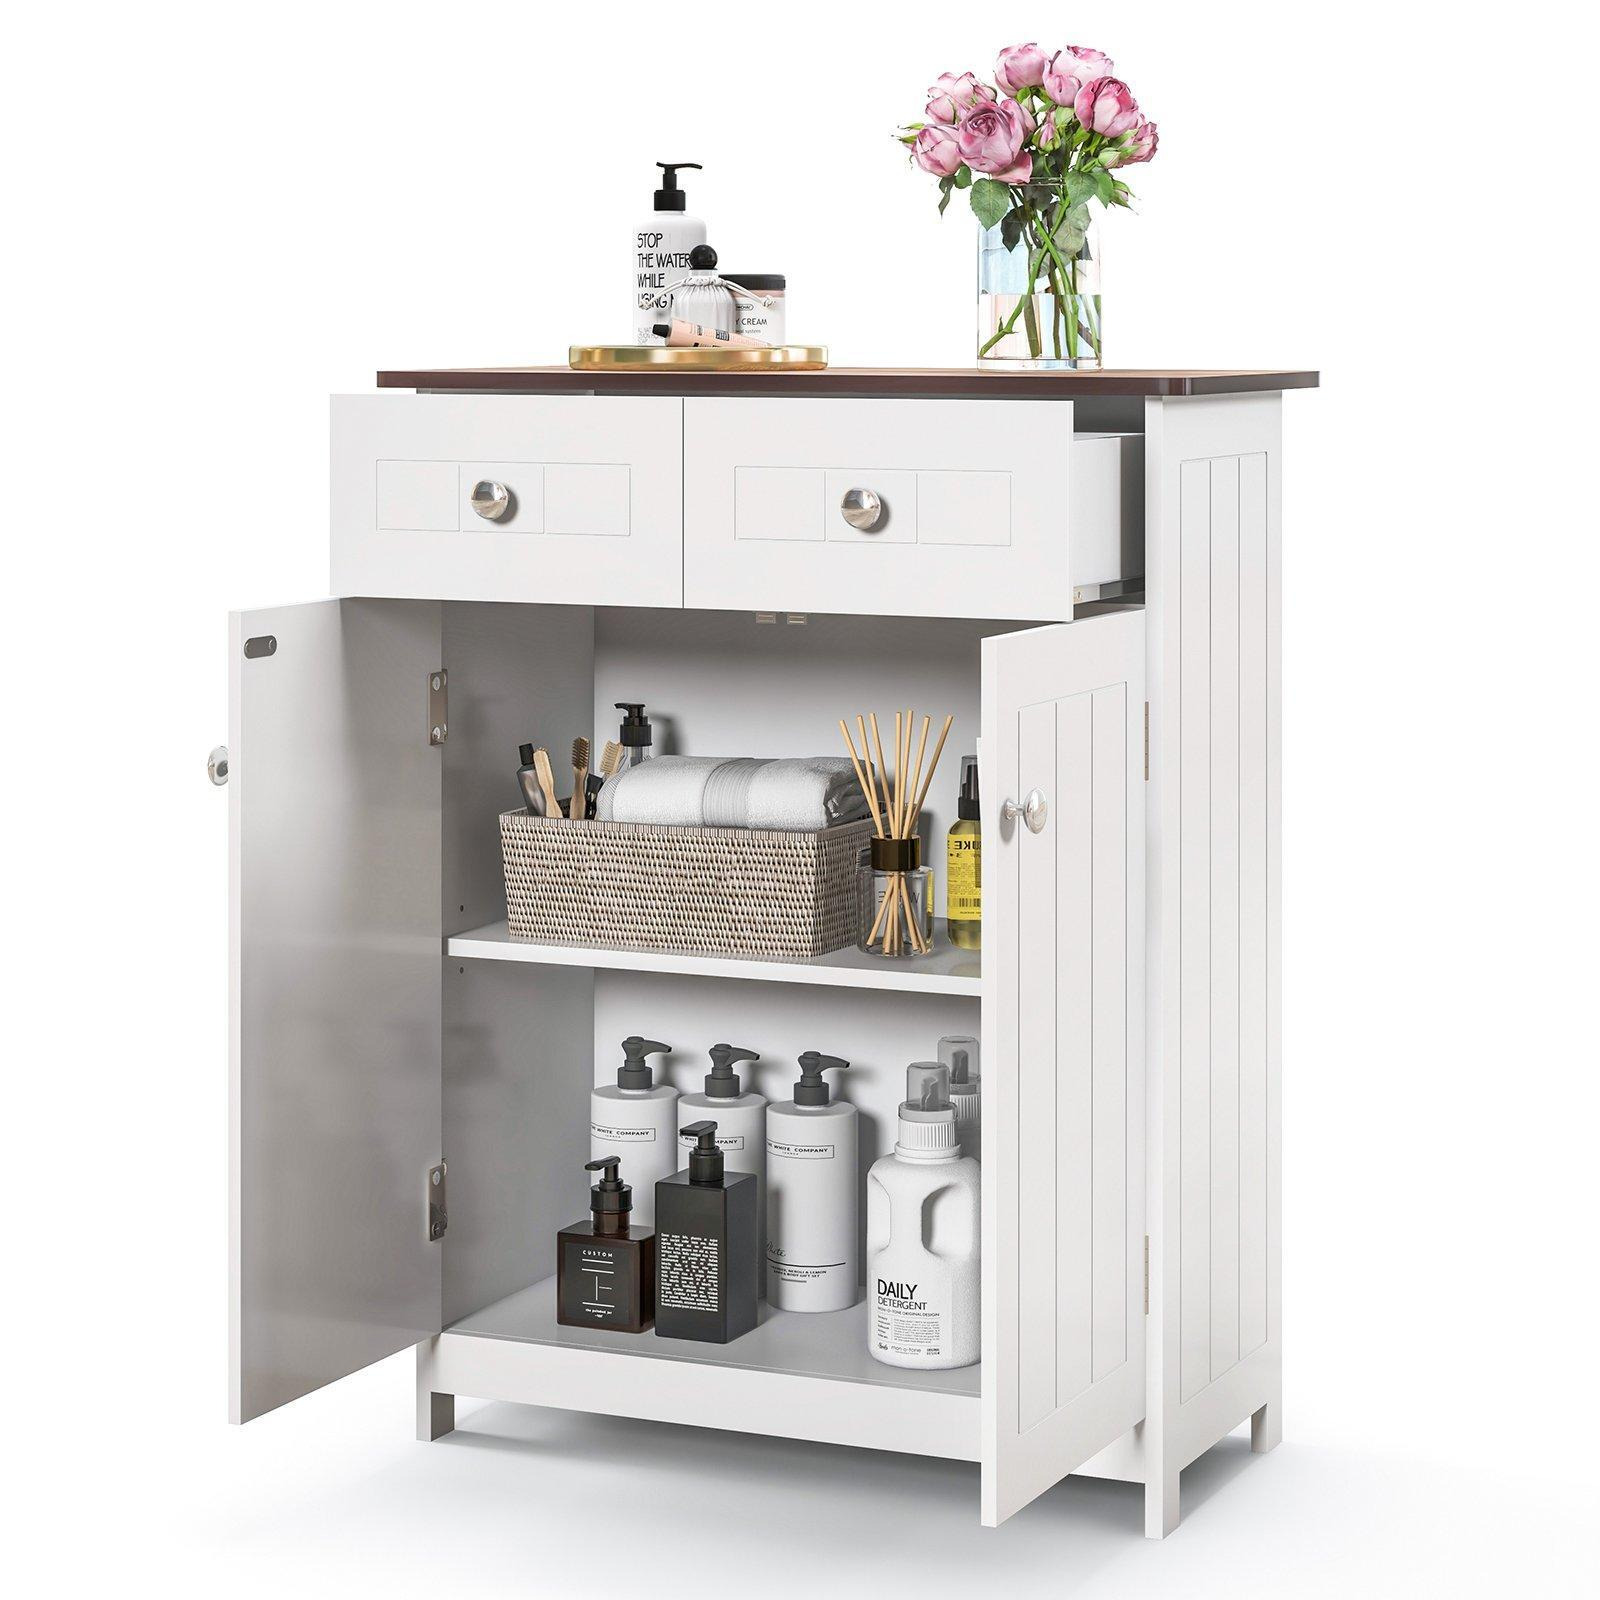 Bathroom Floor Cabinet with 2 Drawers and 2 Doors - image 1